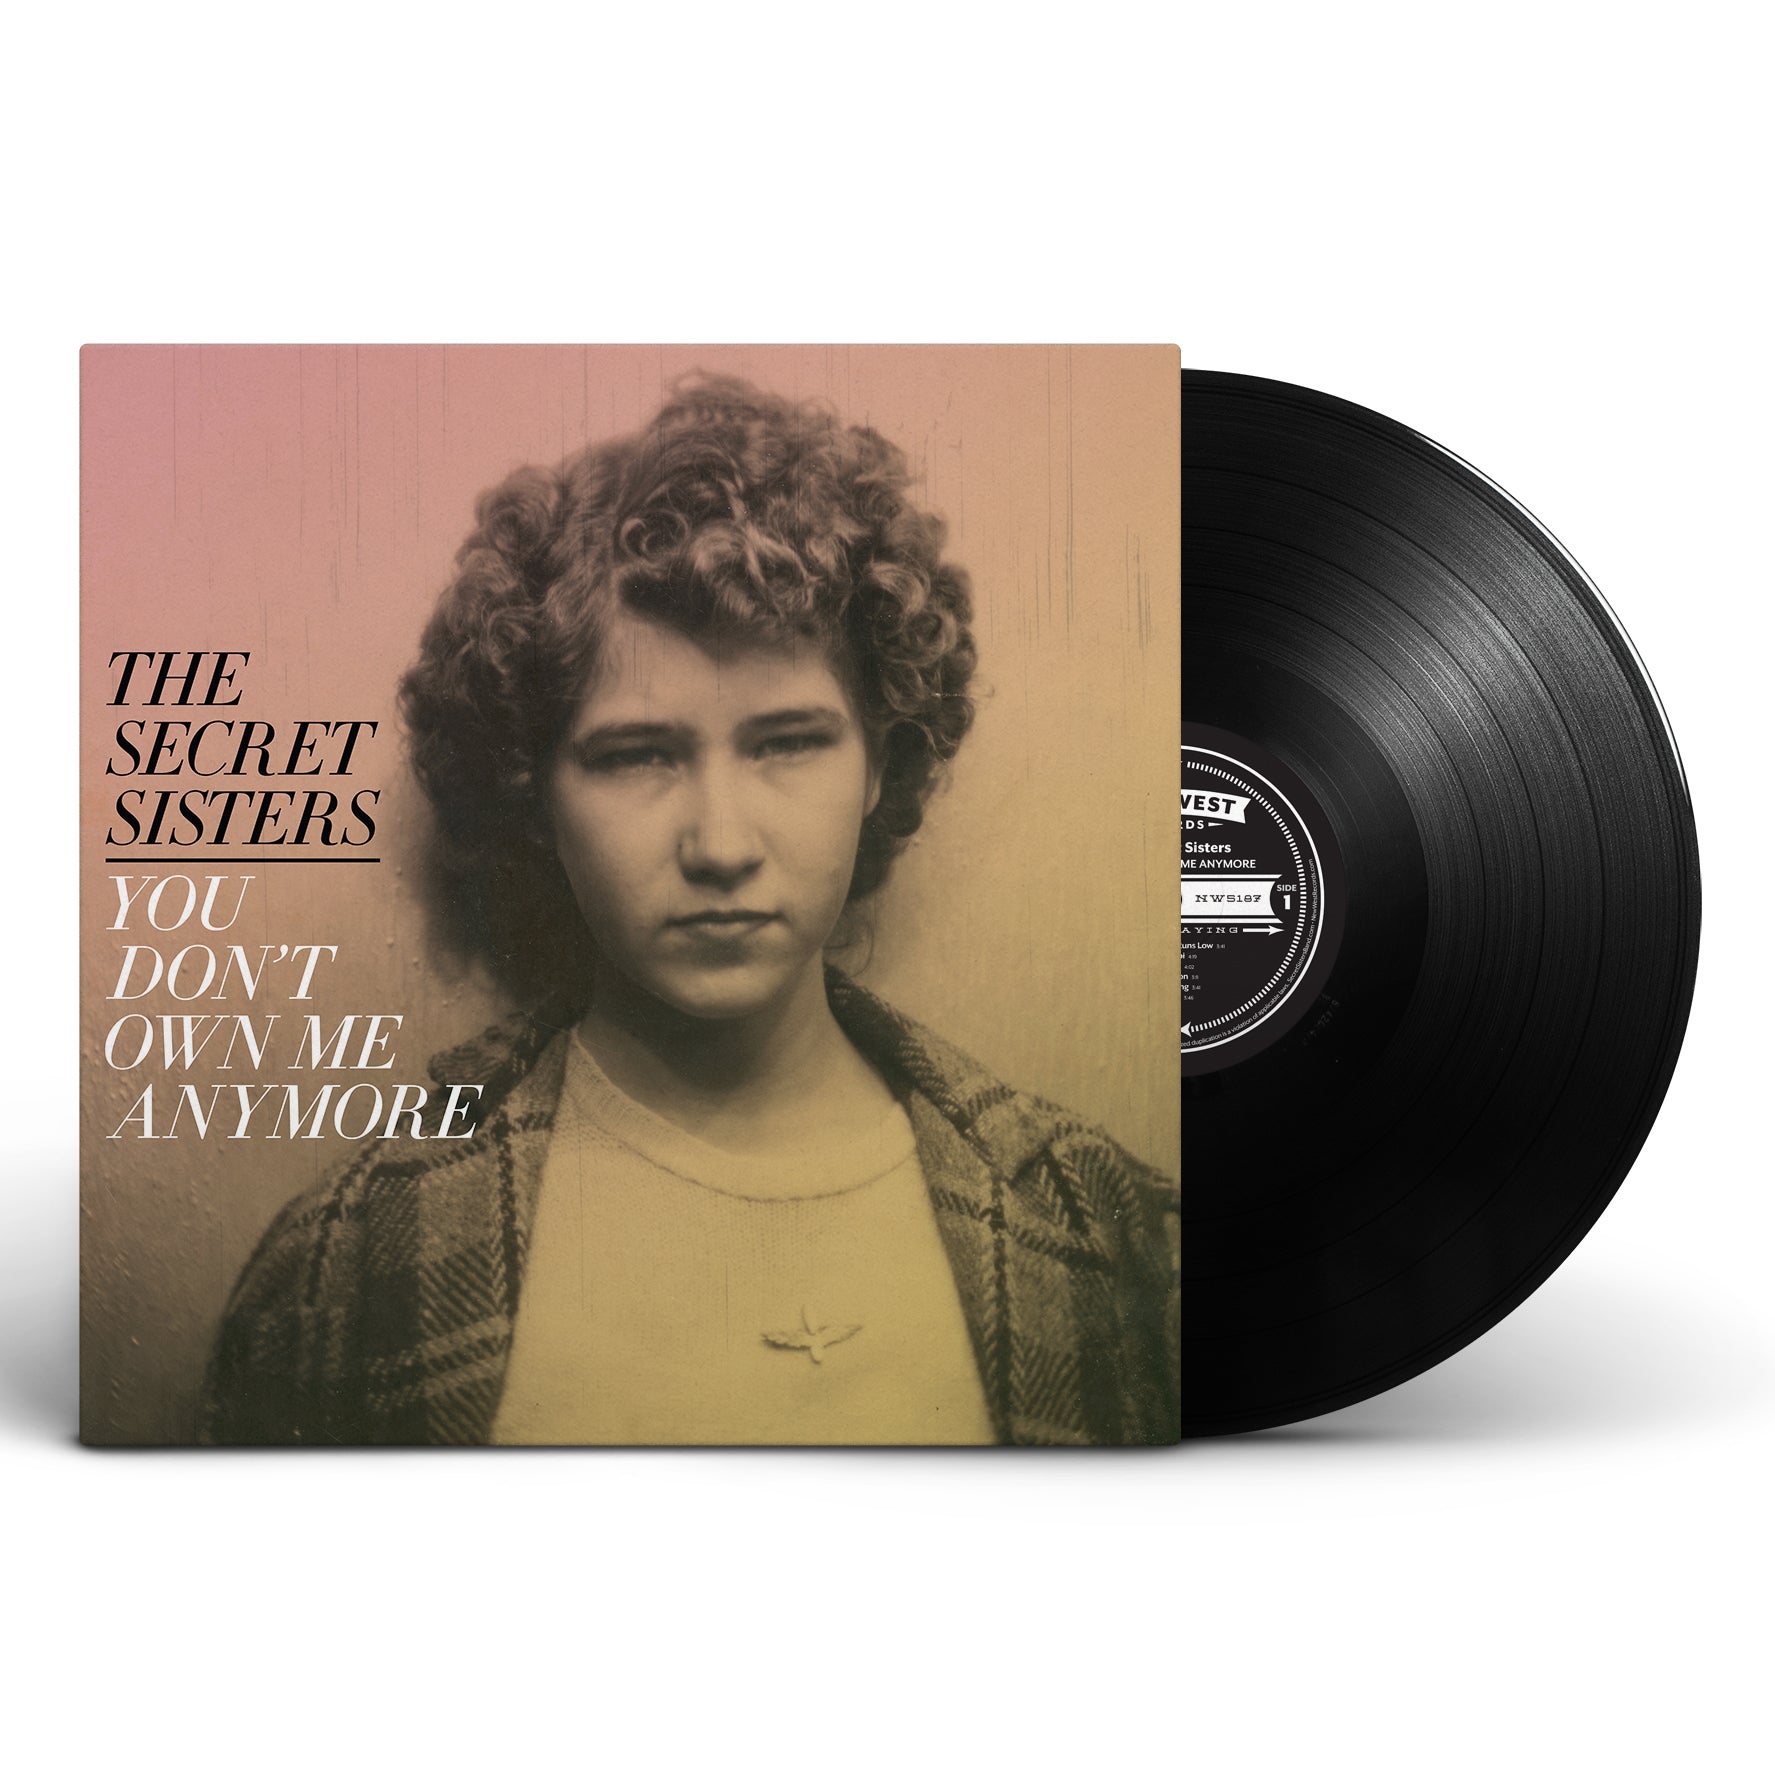 The Secret Sisters - You Don't Own Me Anymore [Vinyl]